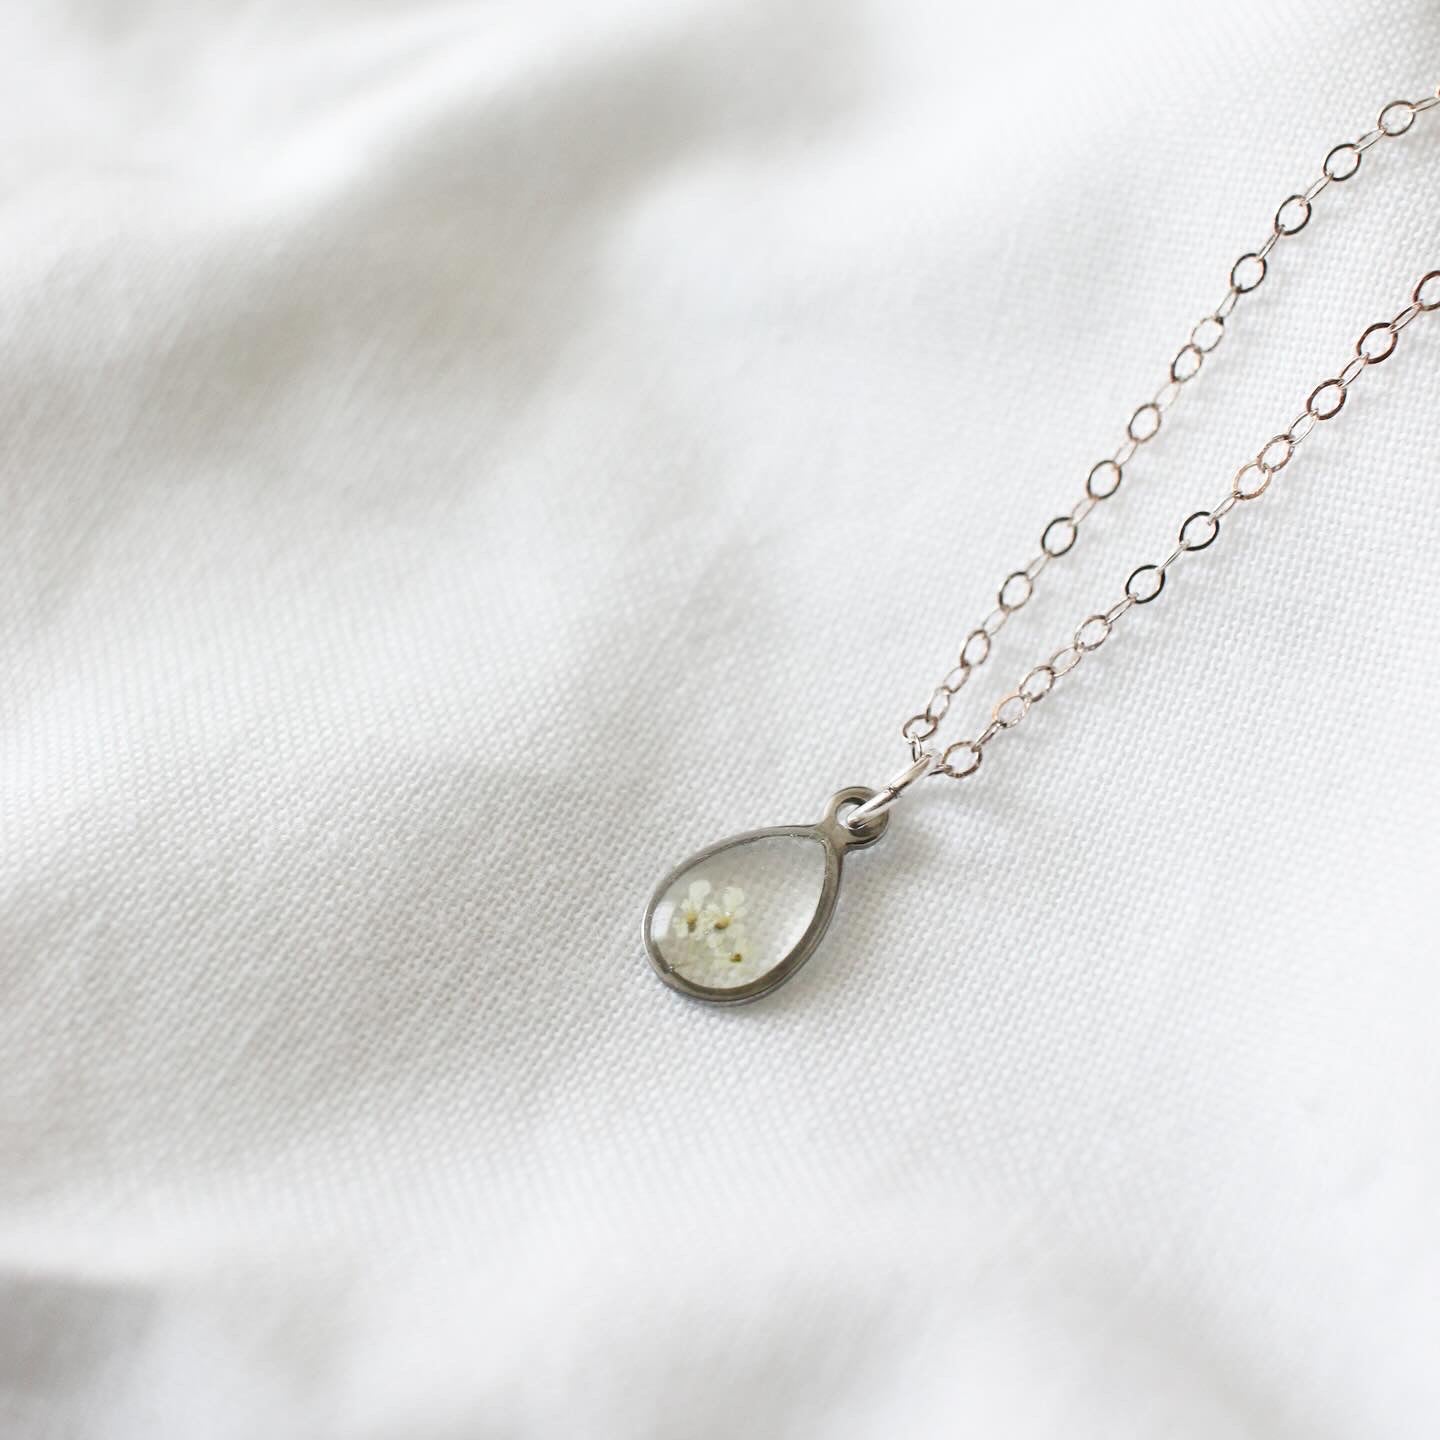 Silver Raindrop Queen Anne's Lace Necklace